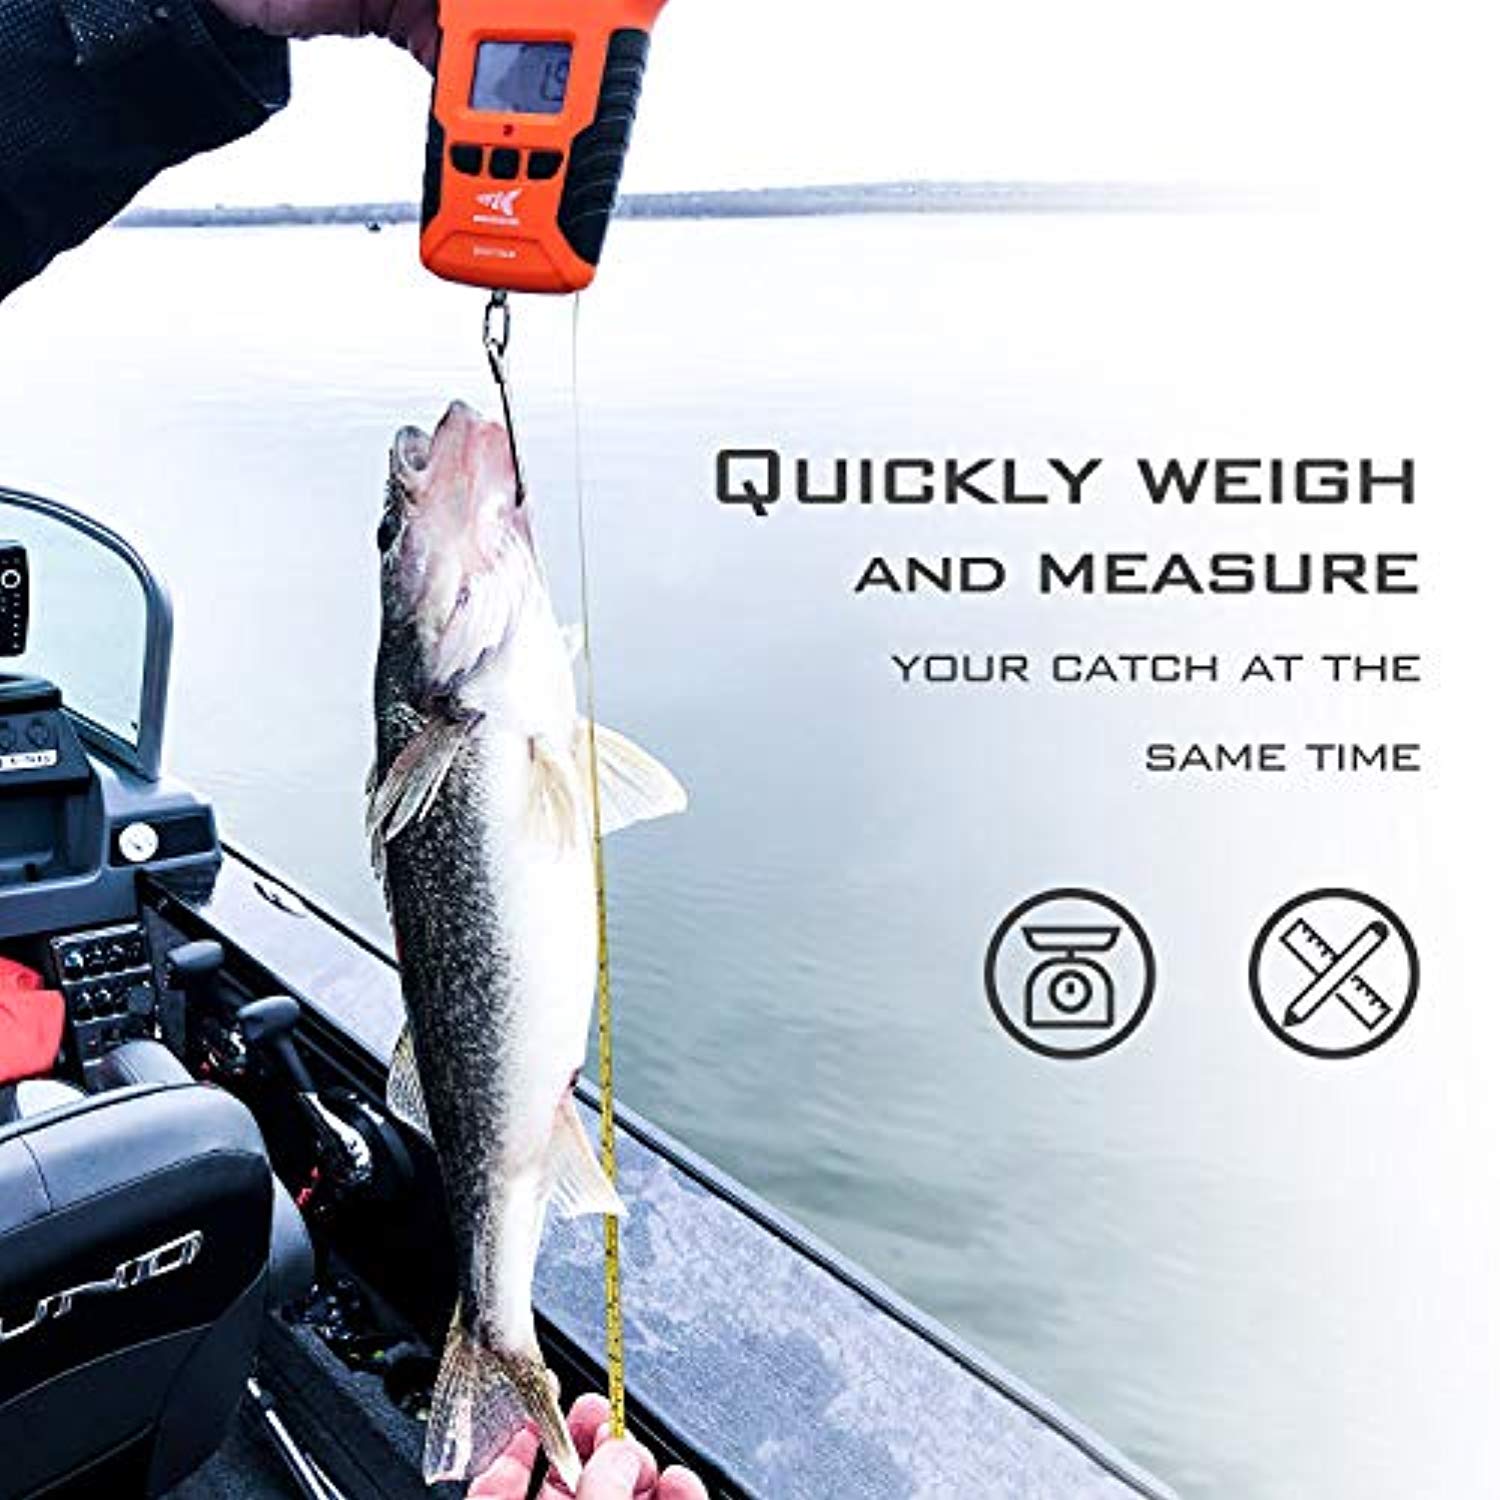 New waterproof fishing scale, Fishing scale, waterproof! Use it to weigh  your fish and measure its size, pls sharing some pictures with your firends  and they can know your fish weight